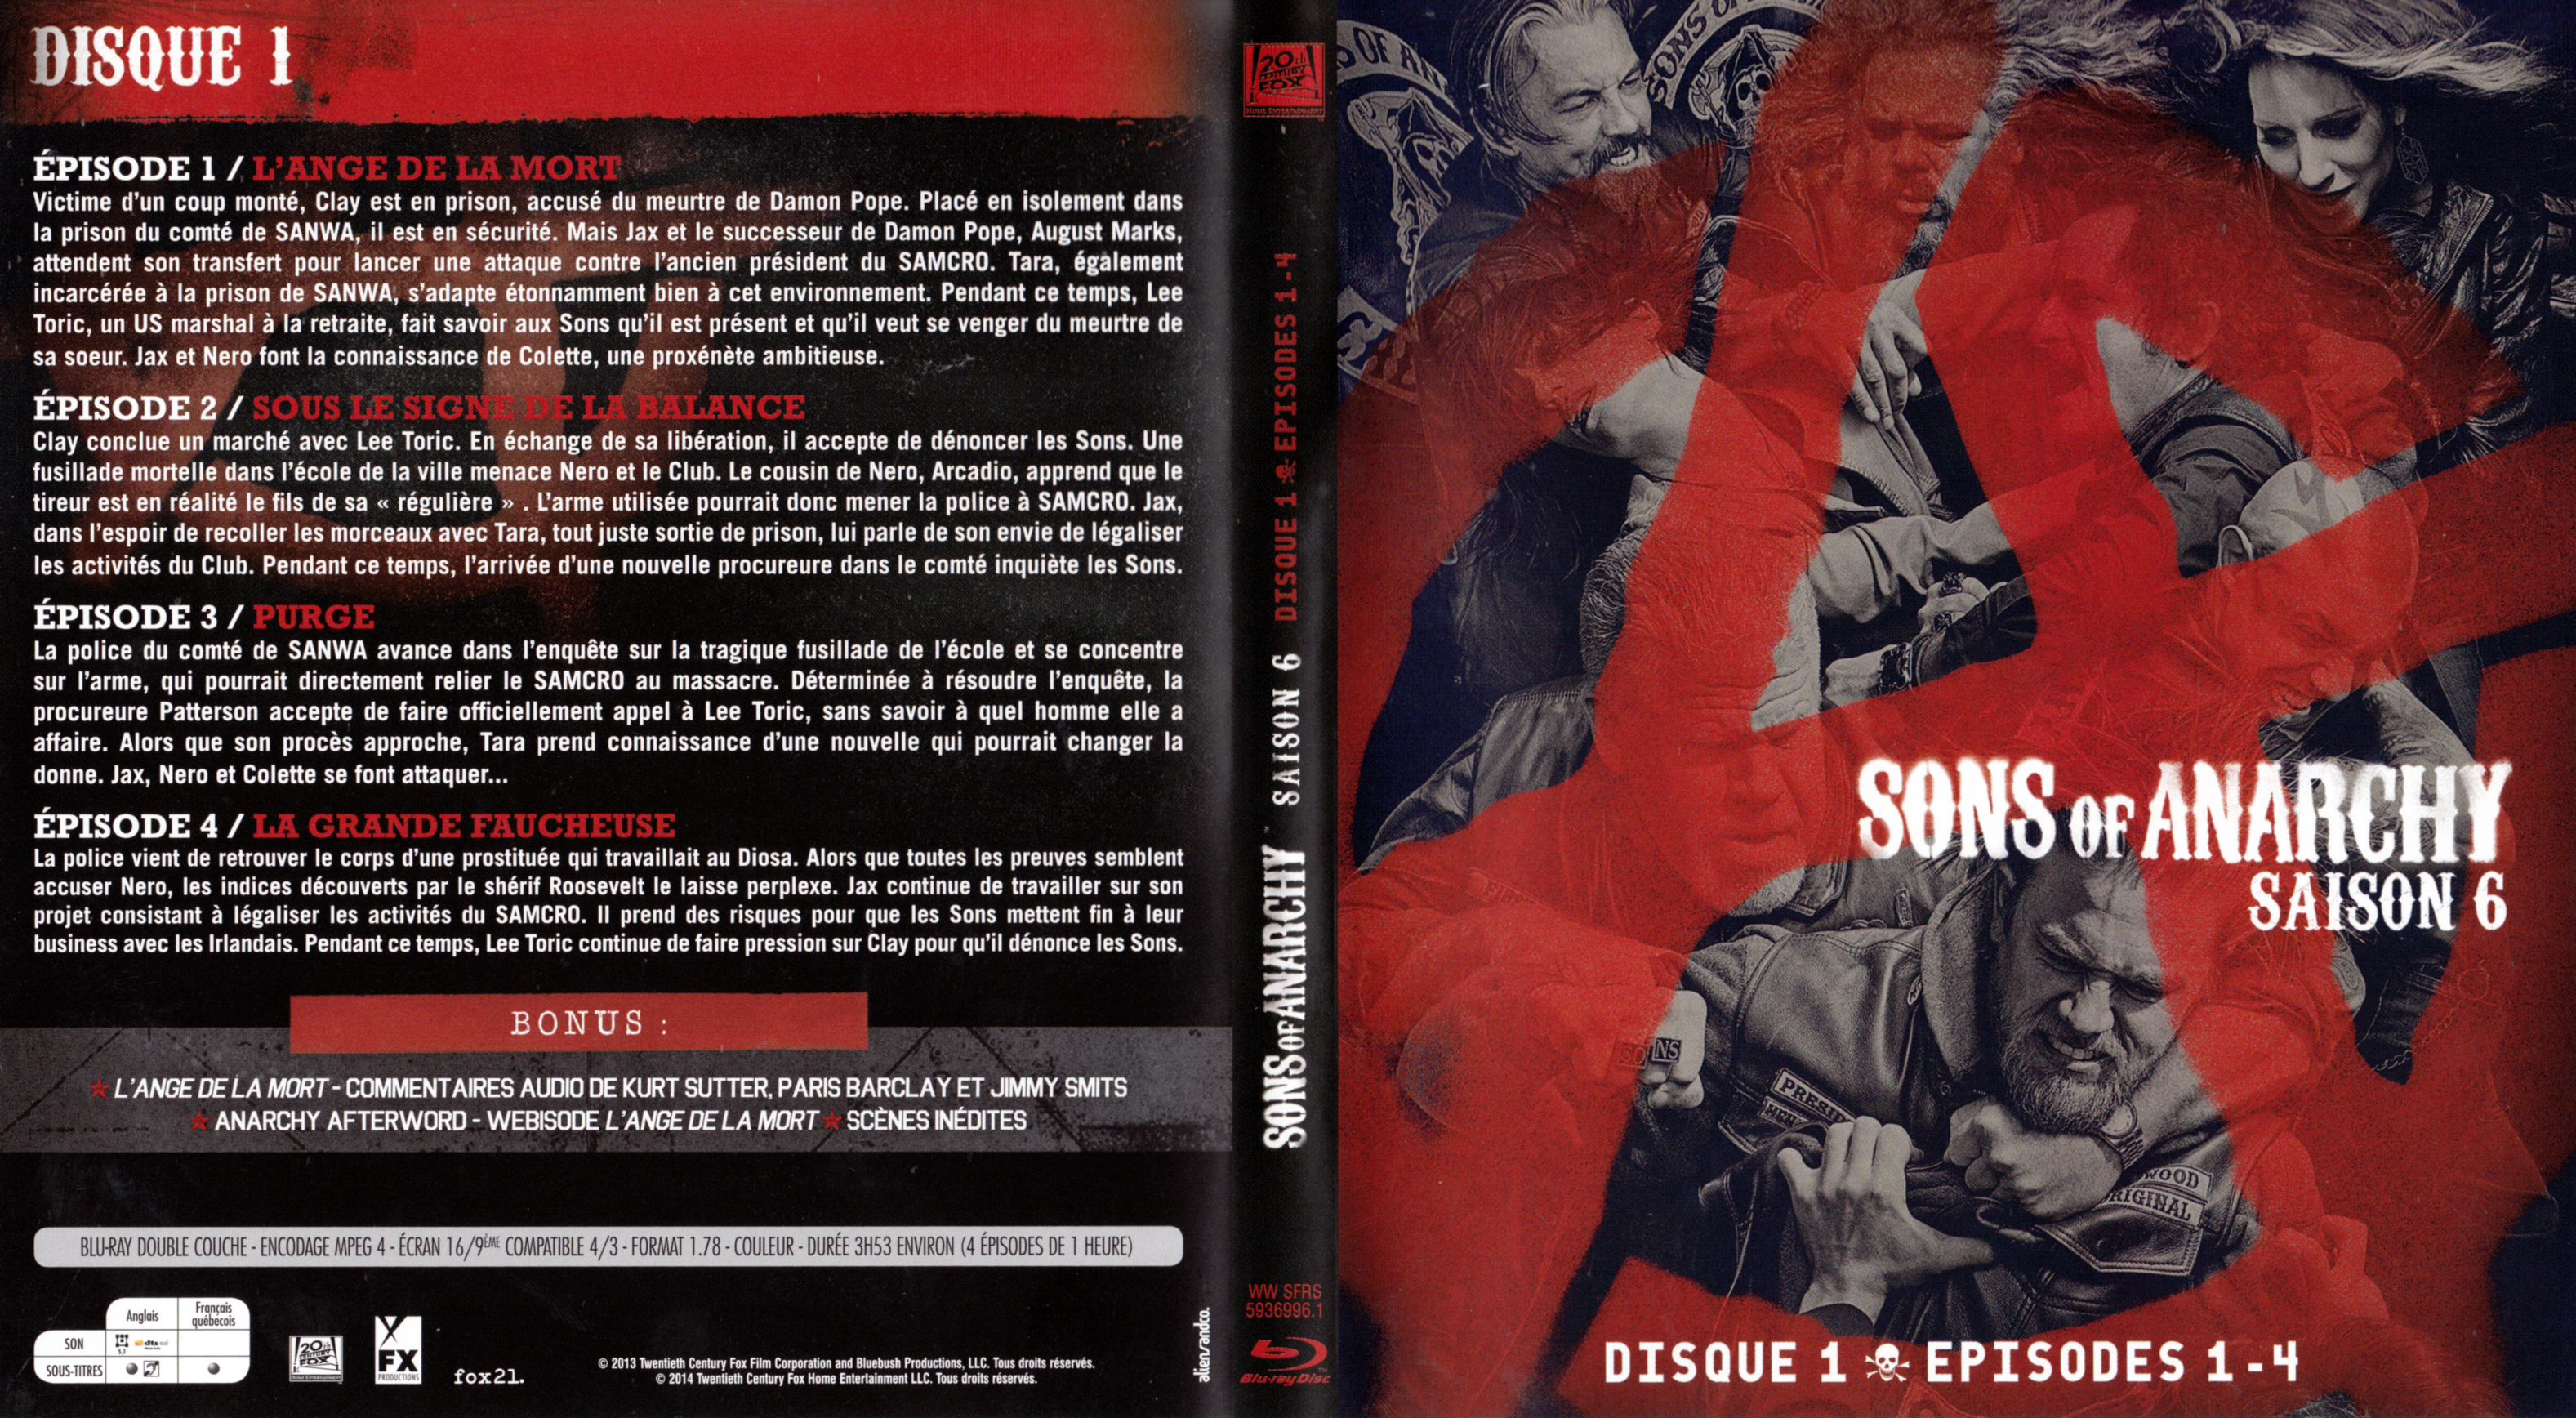 Jaquette DVD Sons of anarchy Saison 6 DISC 1 (BLU-RAY)